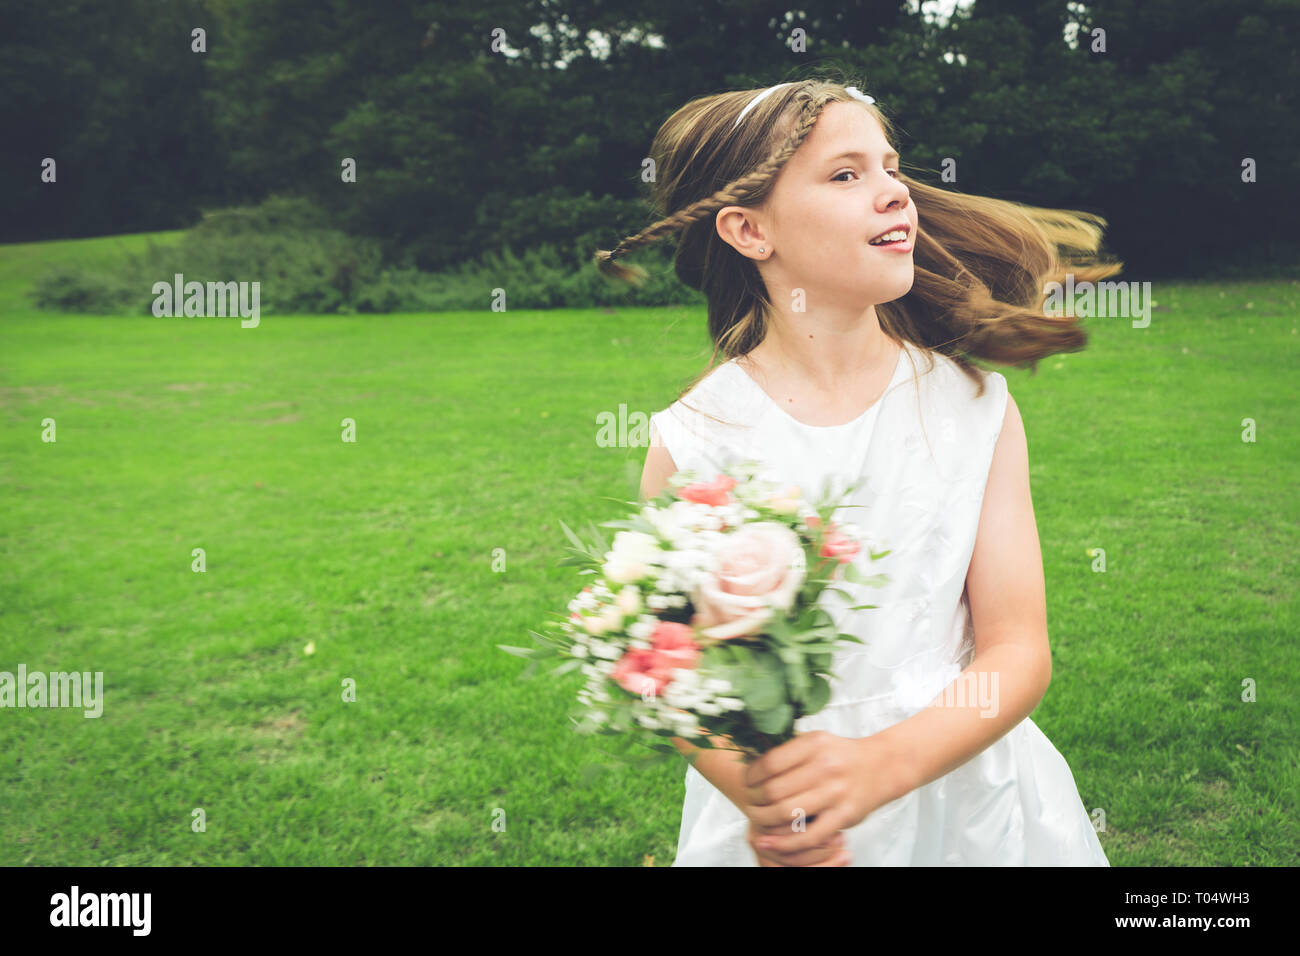 Young girl bridesmaid dancing and spinning in a park, wearing a white dress and holding a rustic posy Stock Photo